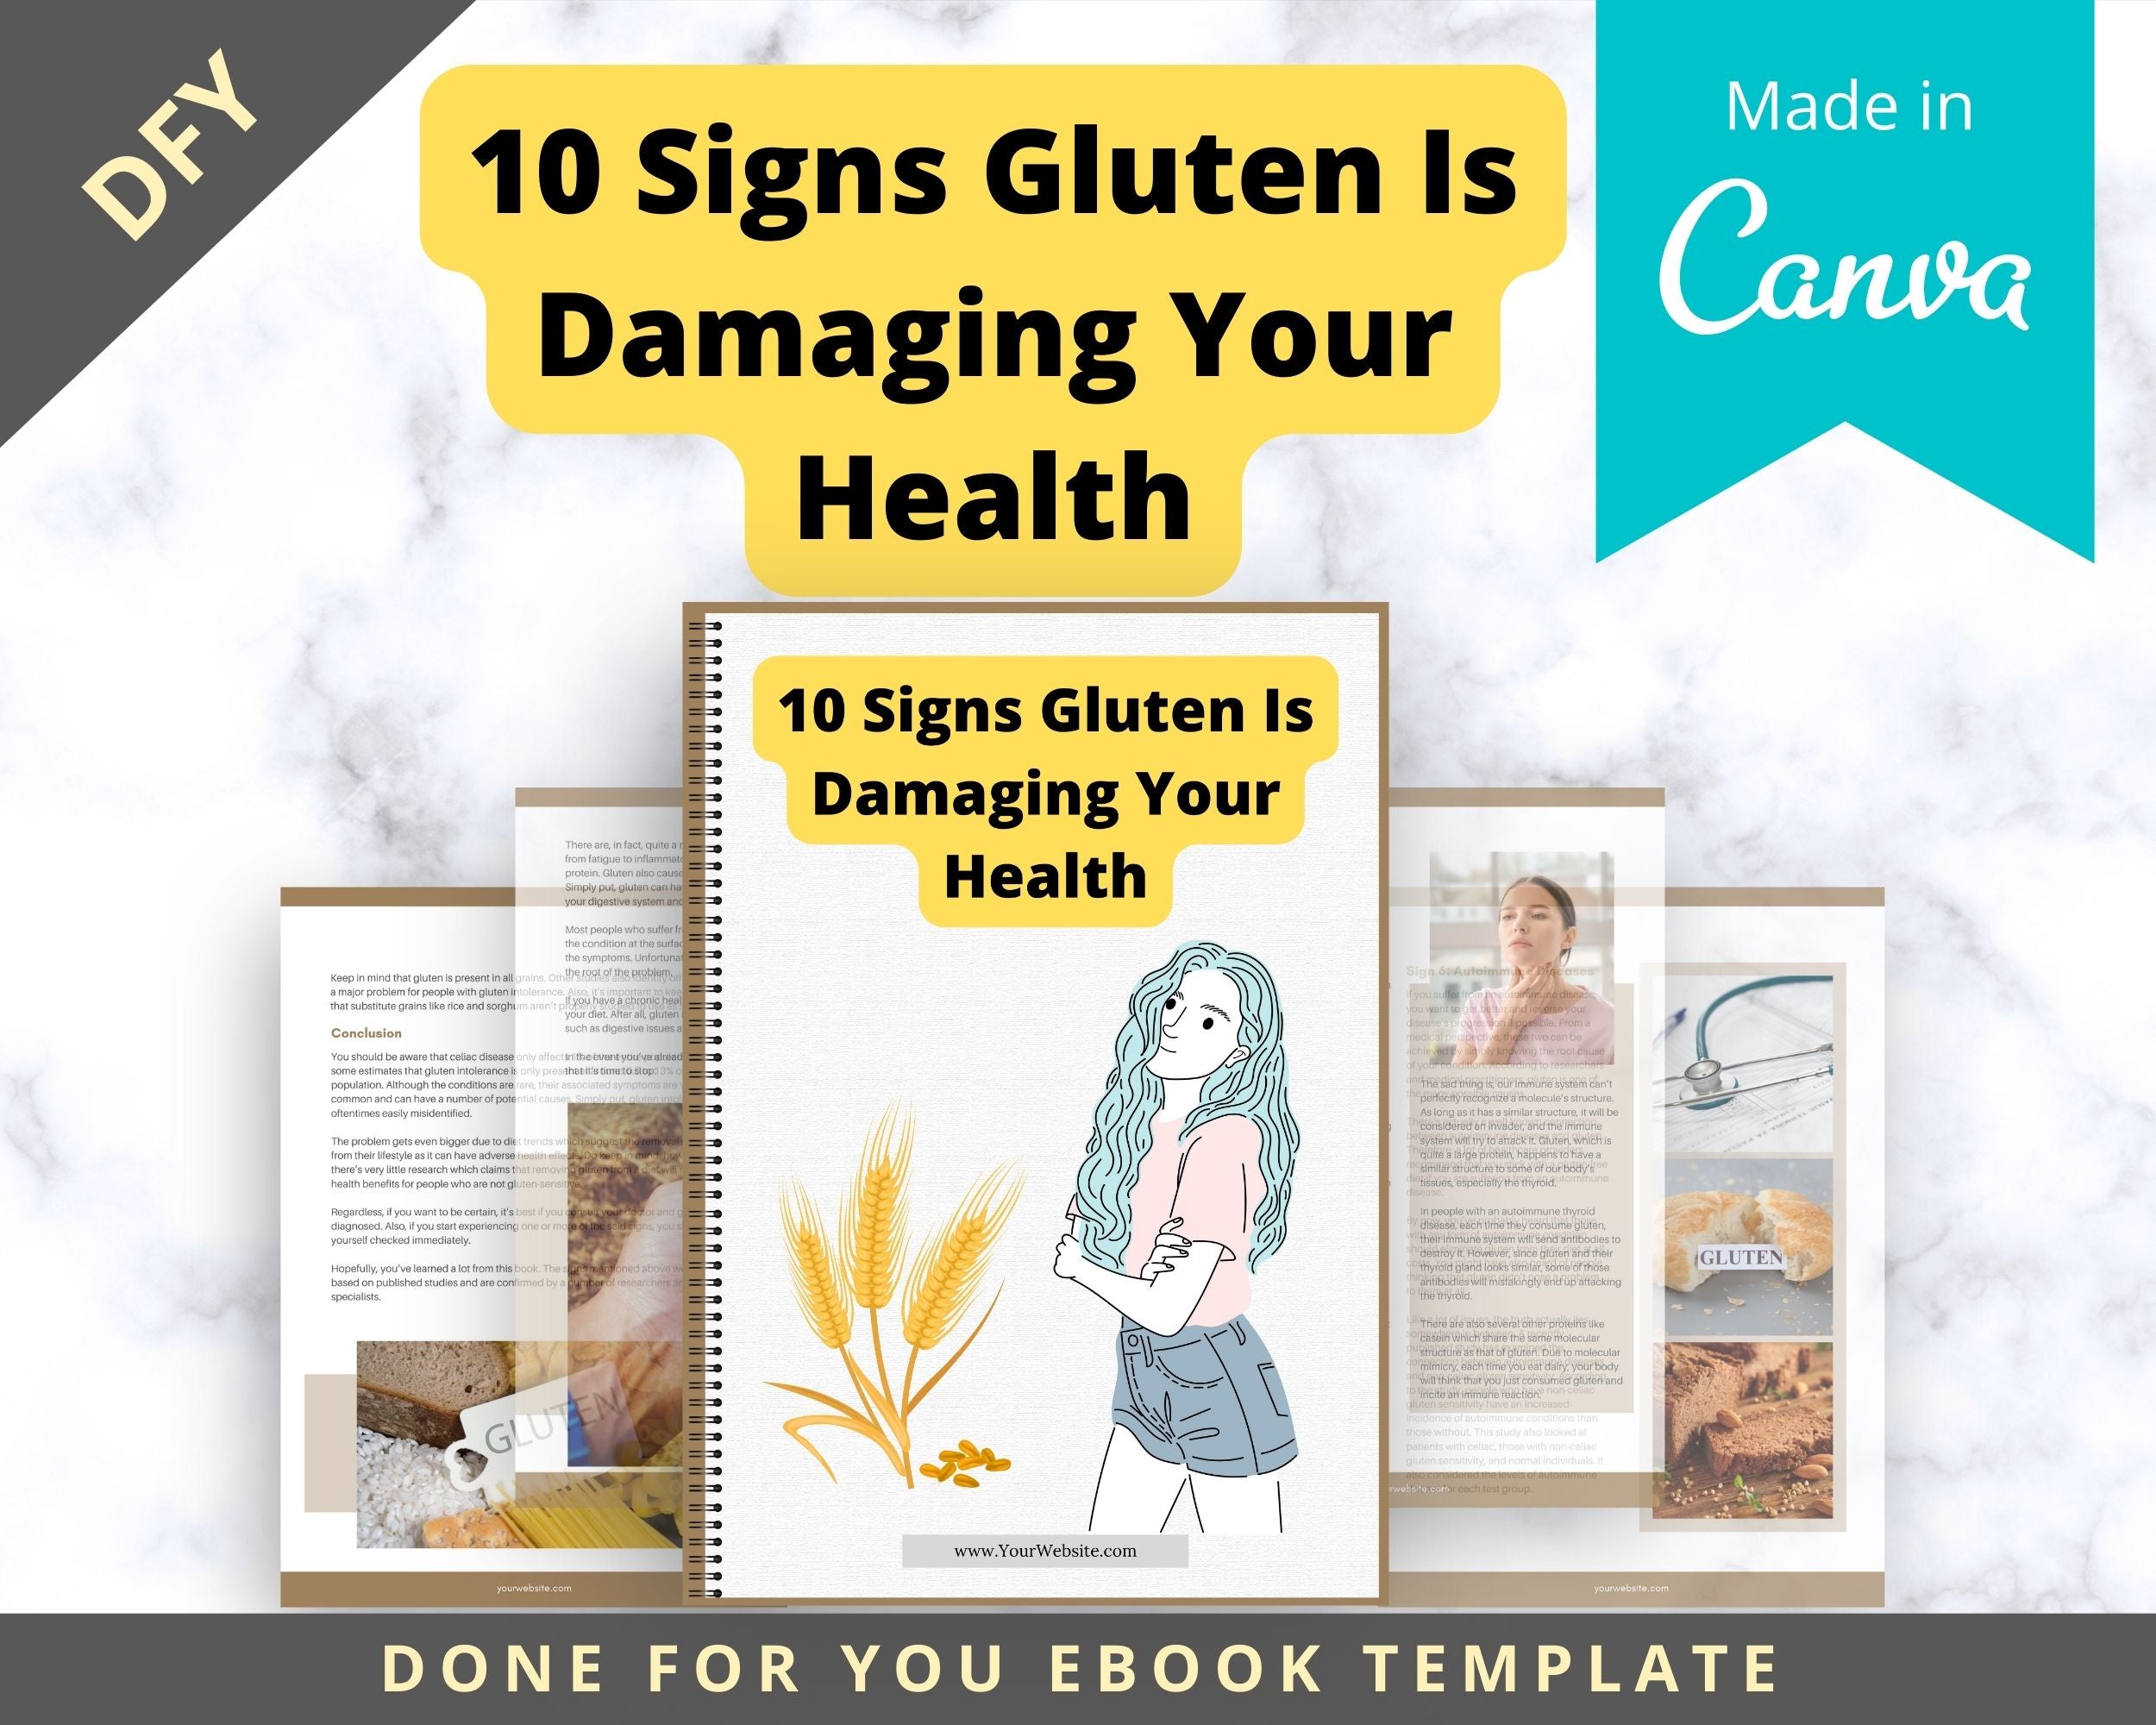 Editable 10 Signs Gluten Is Damaging Your Health Ebook | Done-for-You Ebook in Canva | Rebrandable and Resizable Canva Template